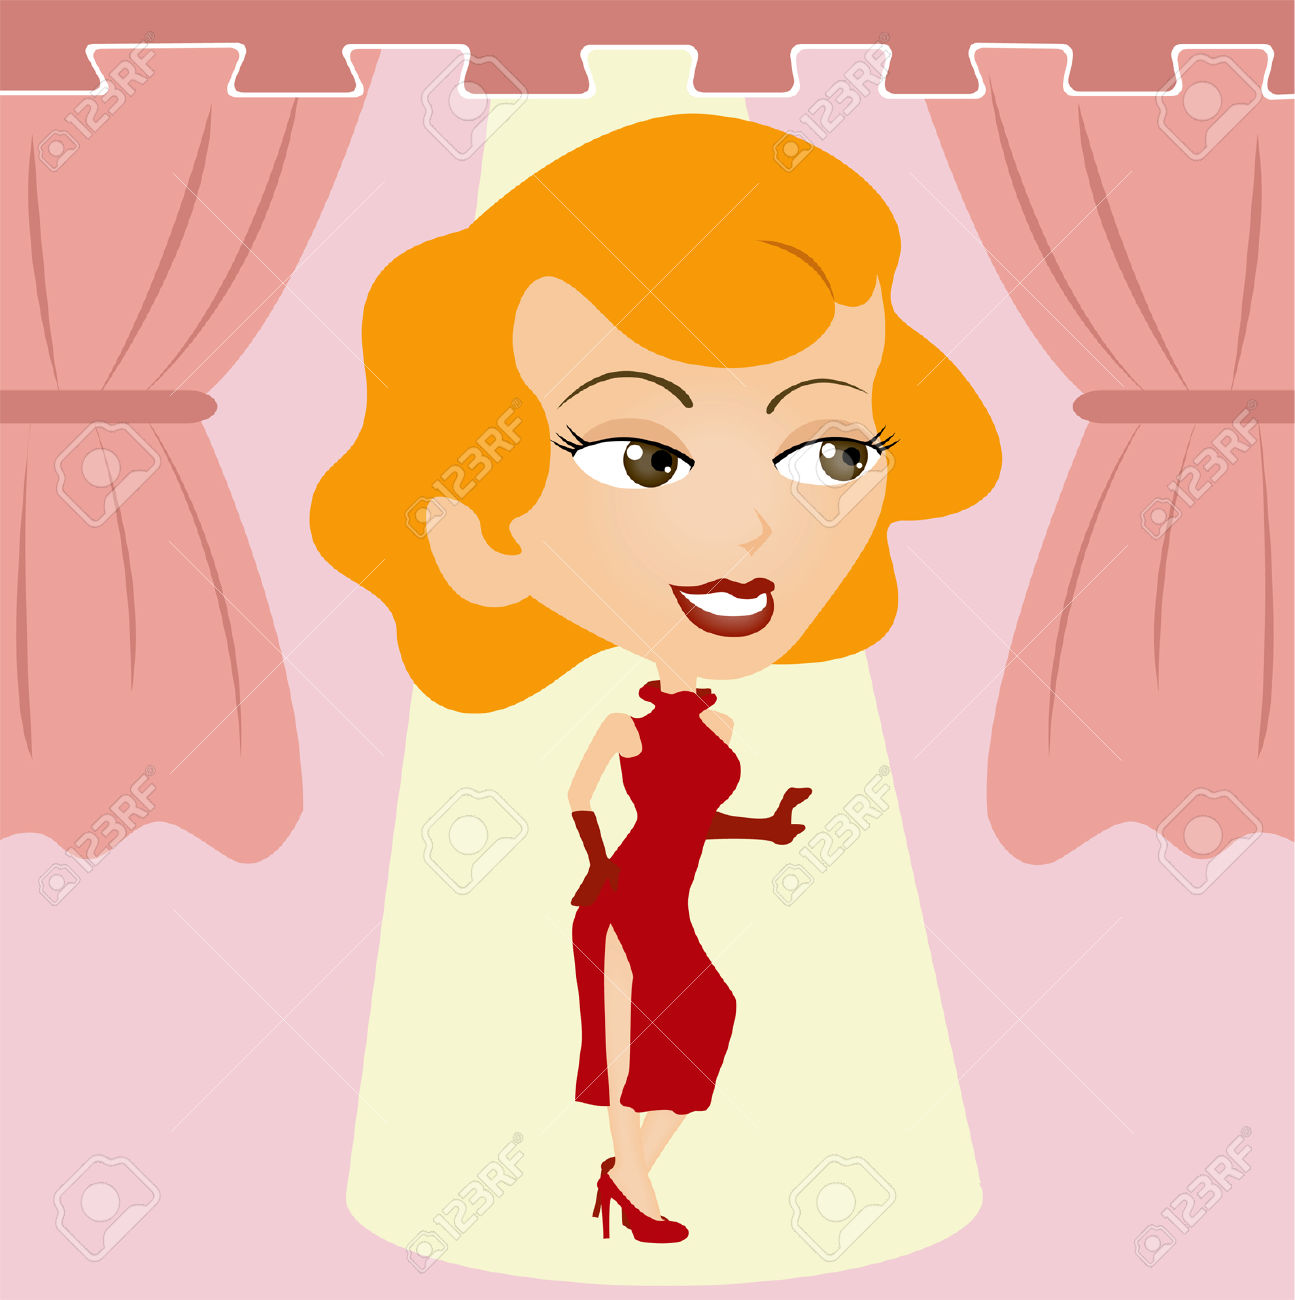 Celebrity clipart #9, Download drawings